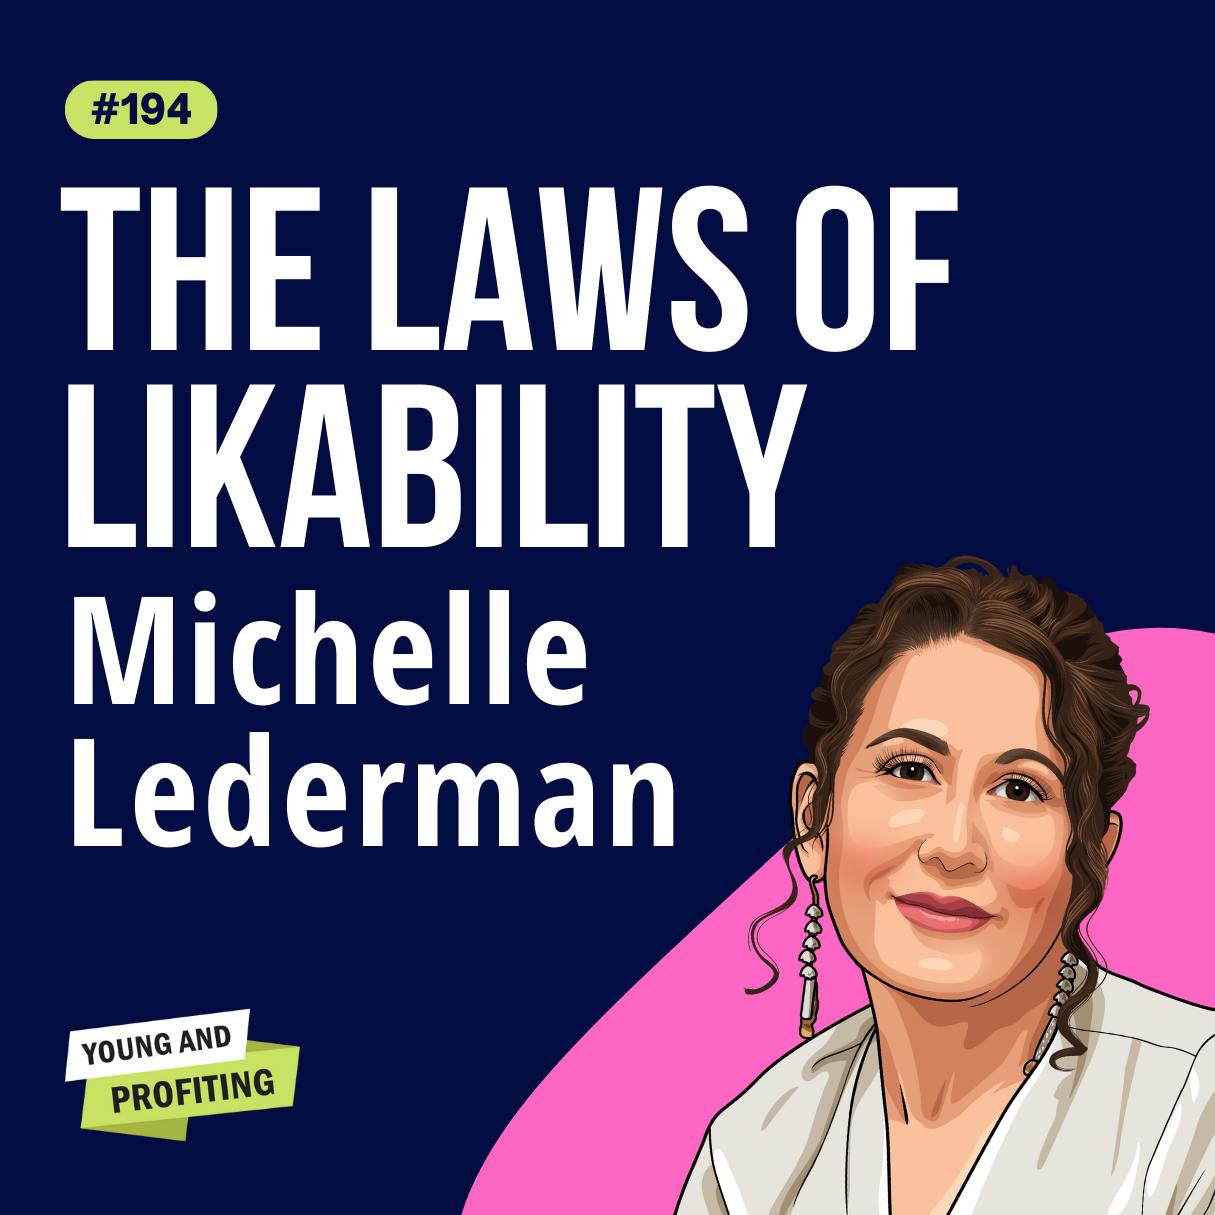 Michelle Lederman: Grow Your Network and Influence with the 11 Laws of Likability | E194 by Hala Taha | YAP Media Network